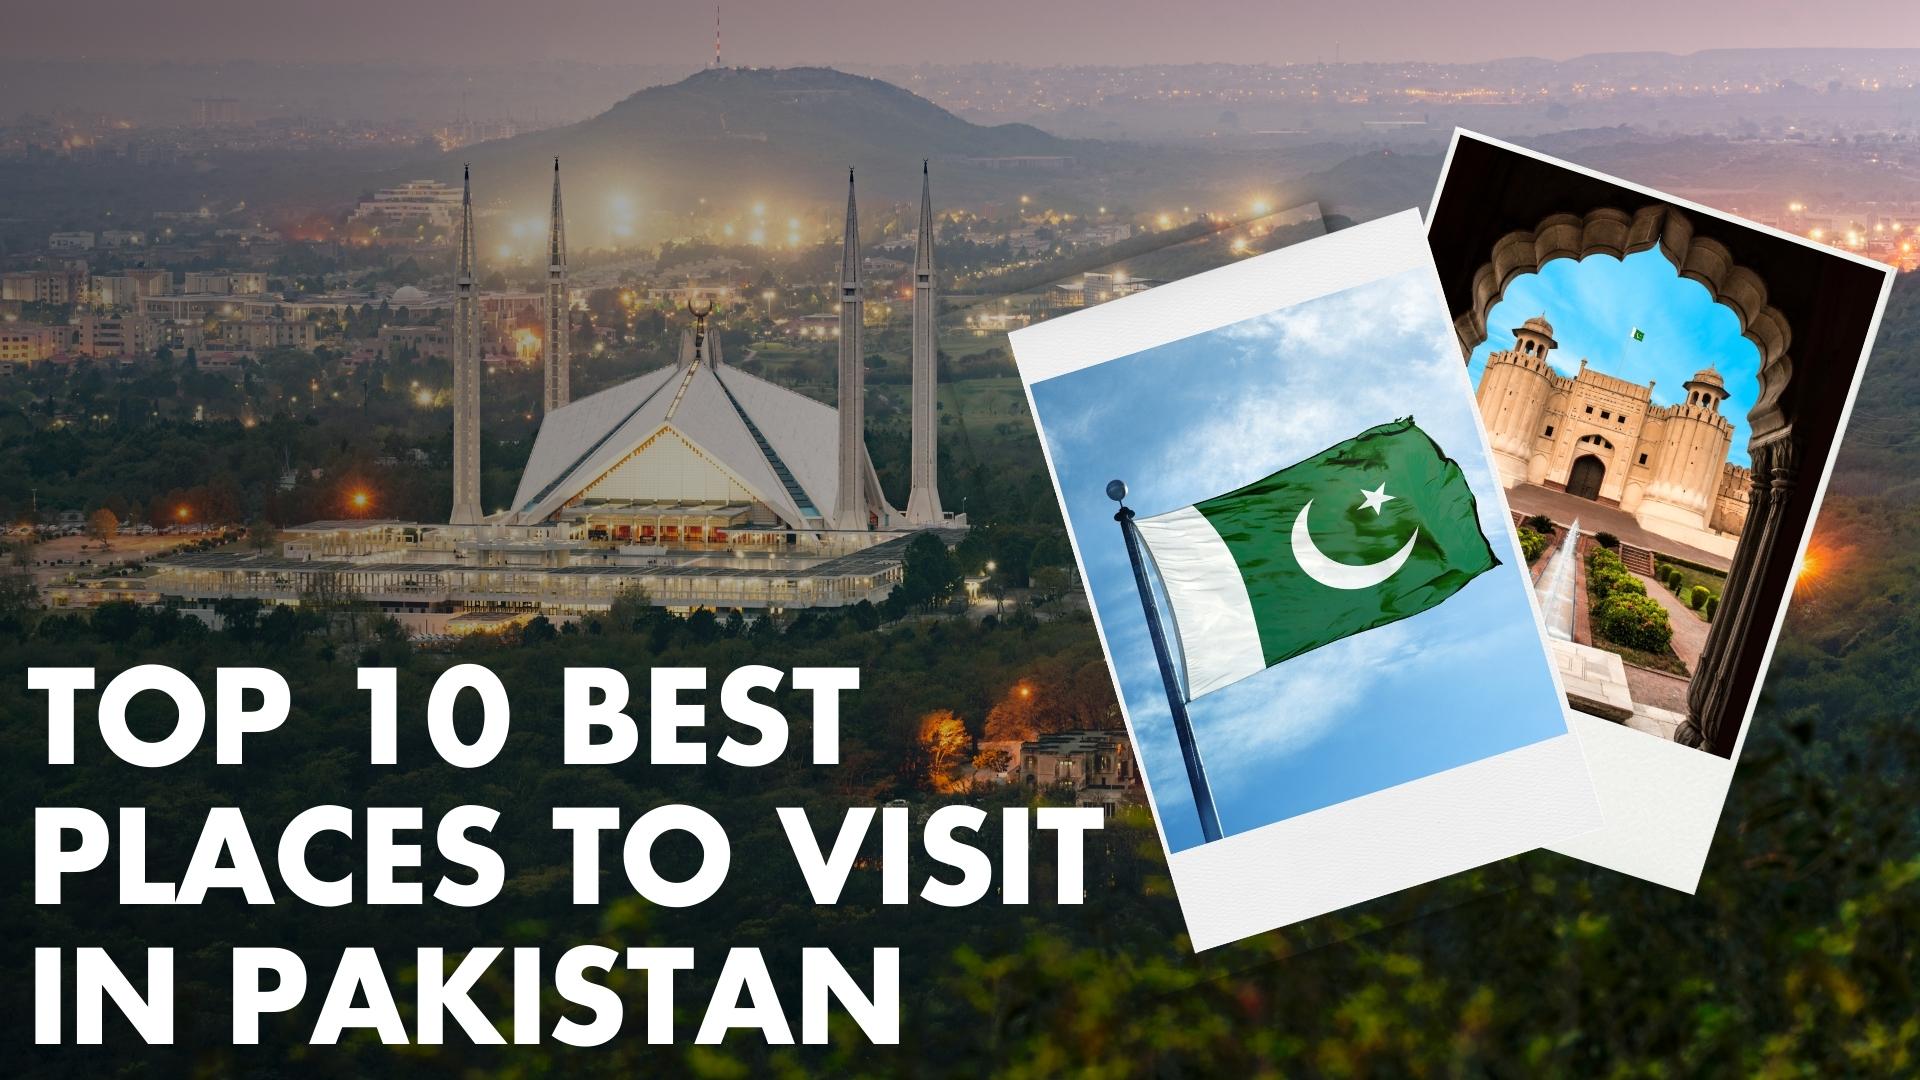 Top 10 Best Places to Visit in Pakistan, Buzz on net